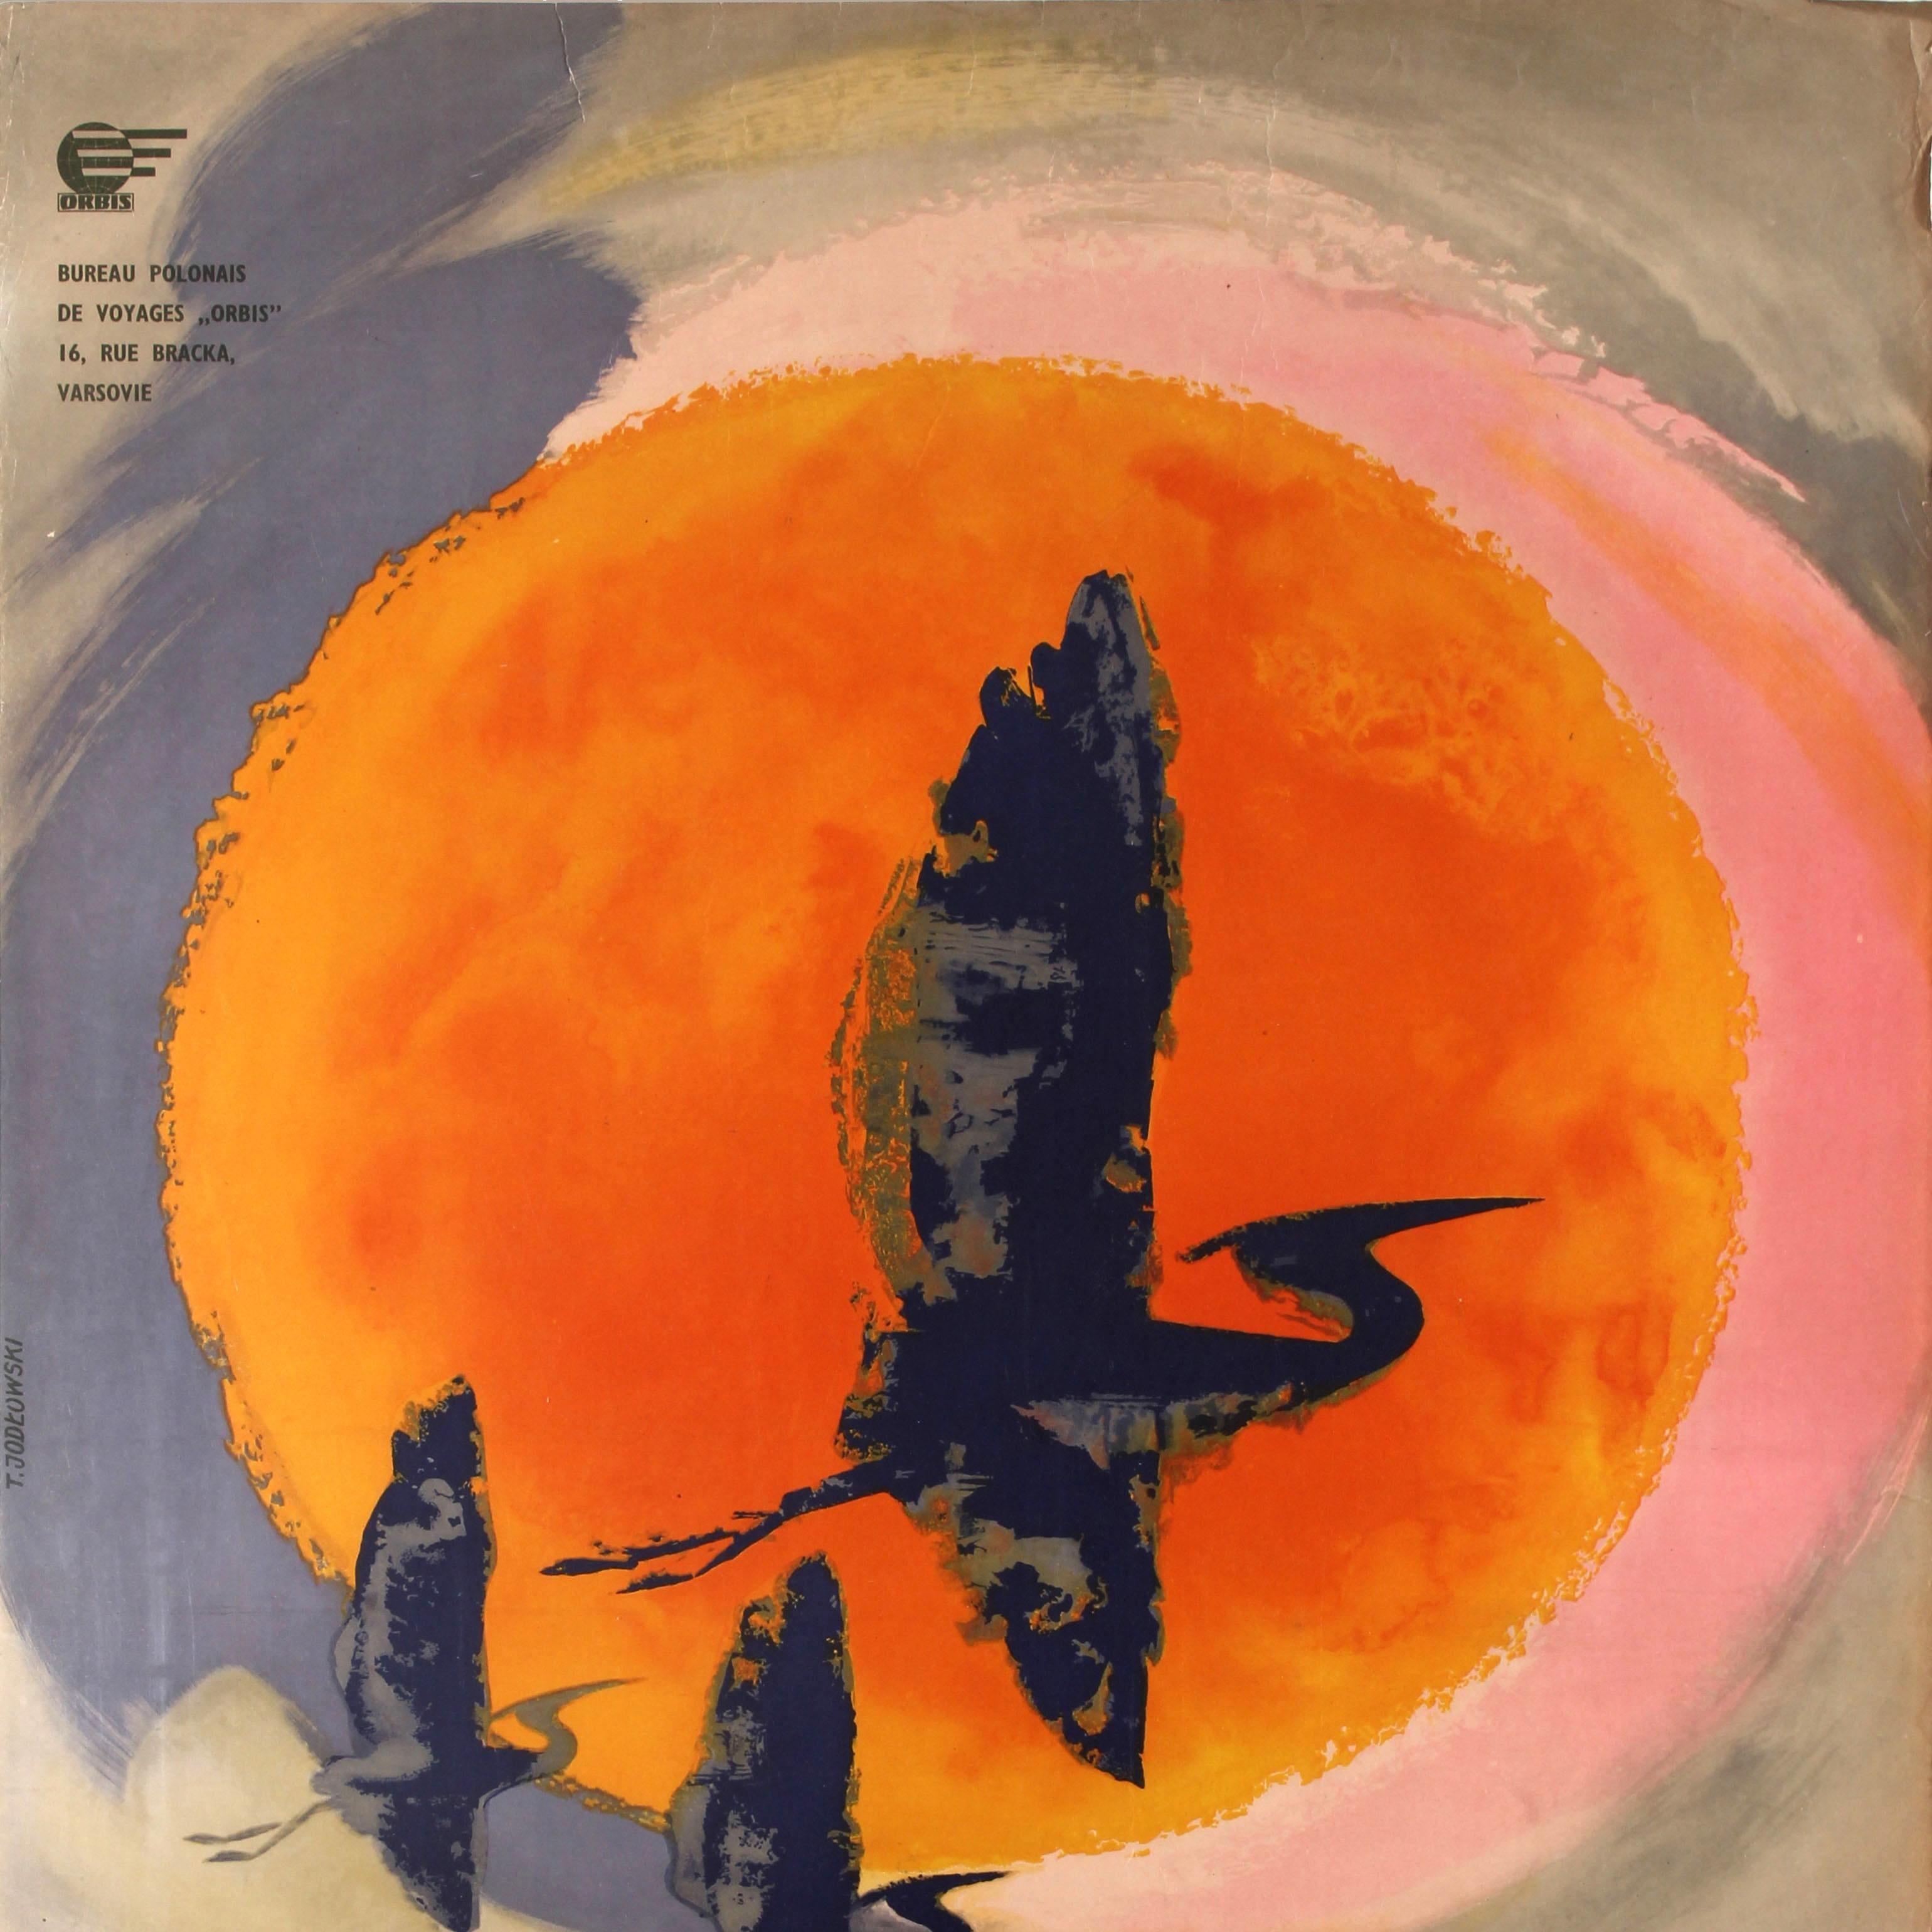 Original vintage travel poster for Poland where you can really relax / Pour vous relaxer venez en Pologne featuring stunning artwork by the Polish artist Tadeusz Jodłowski (1925-2015) depicting three birds flying in front of a blazing sun with the